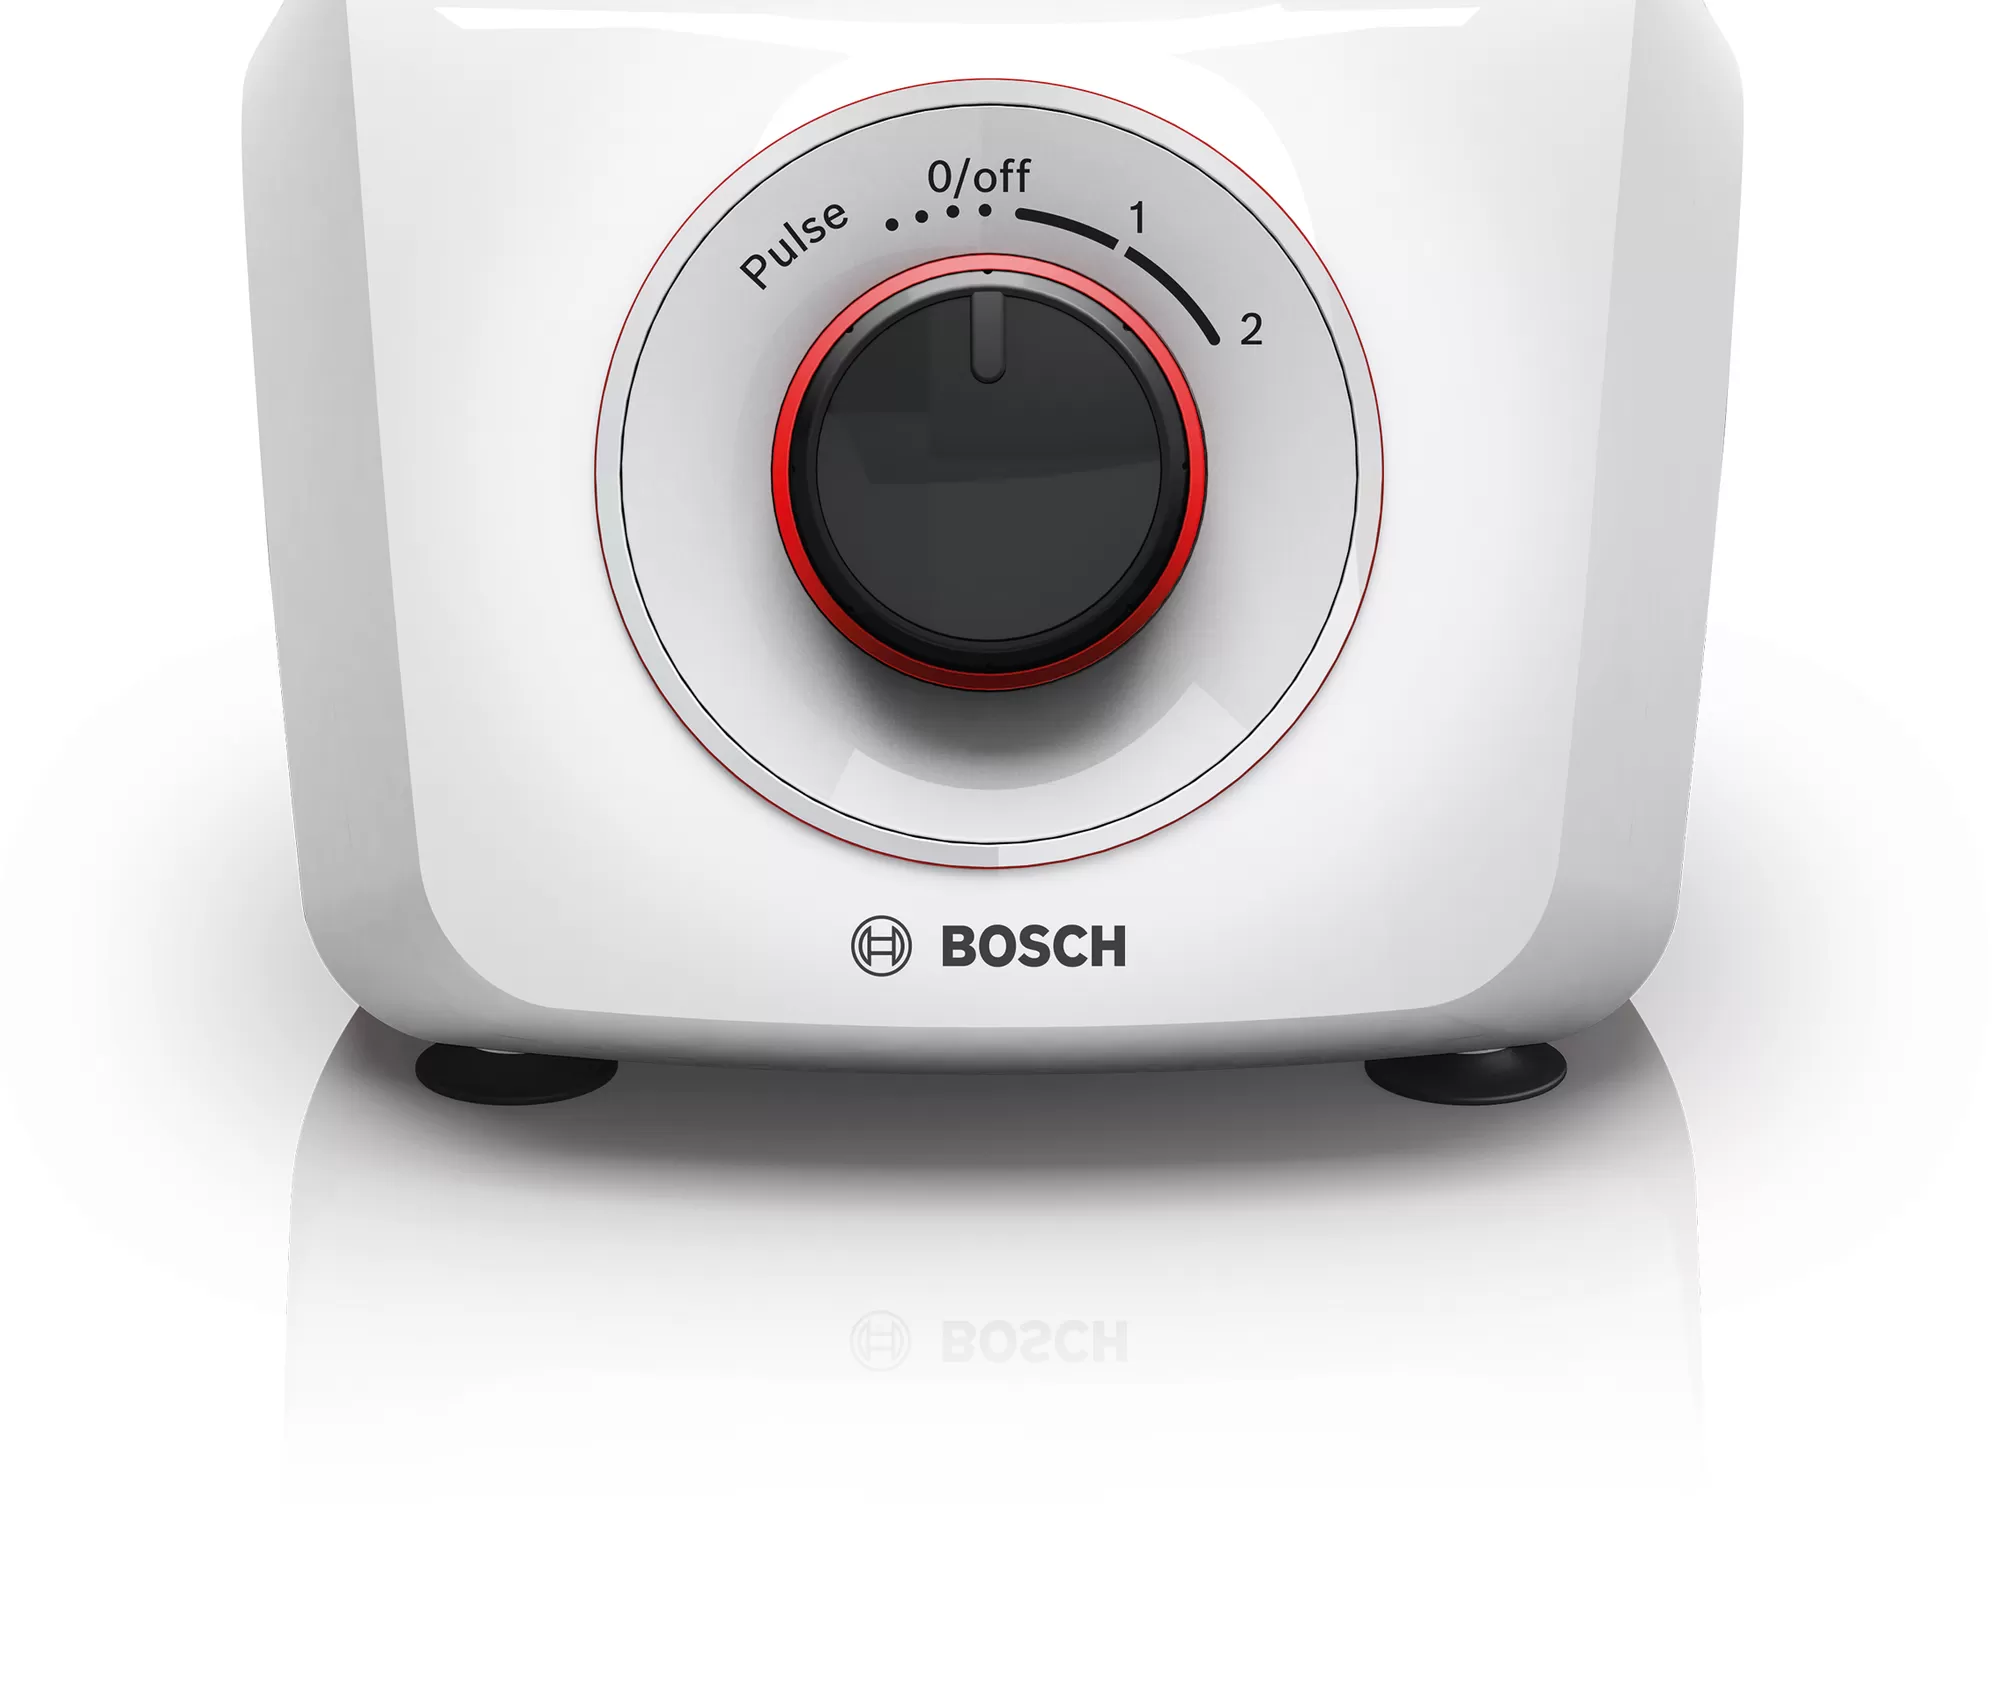 Bosch Blender 500W White+Red - Whole and All